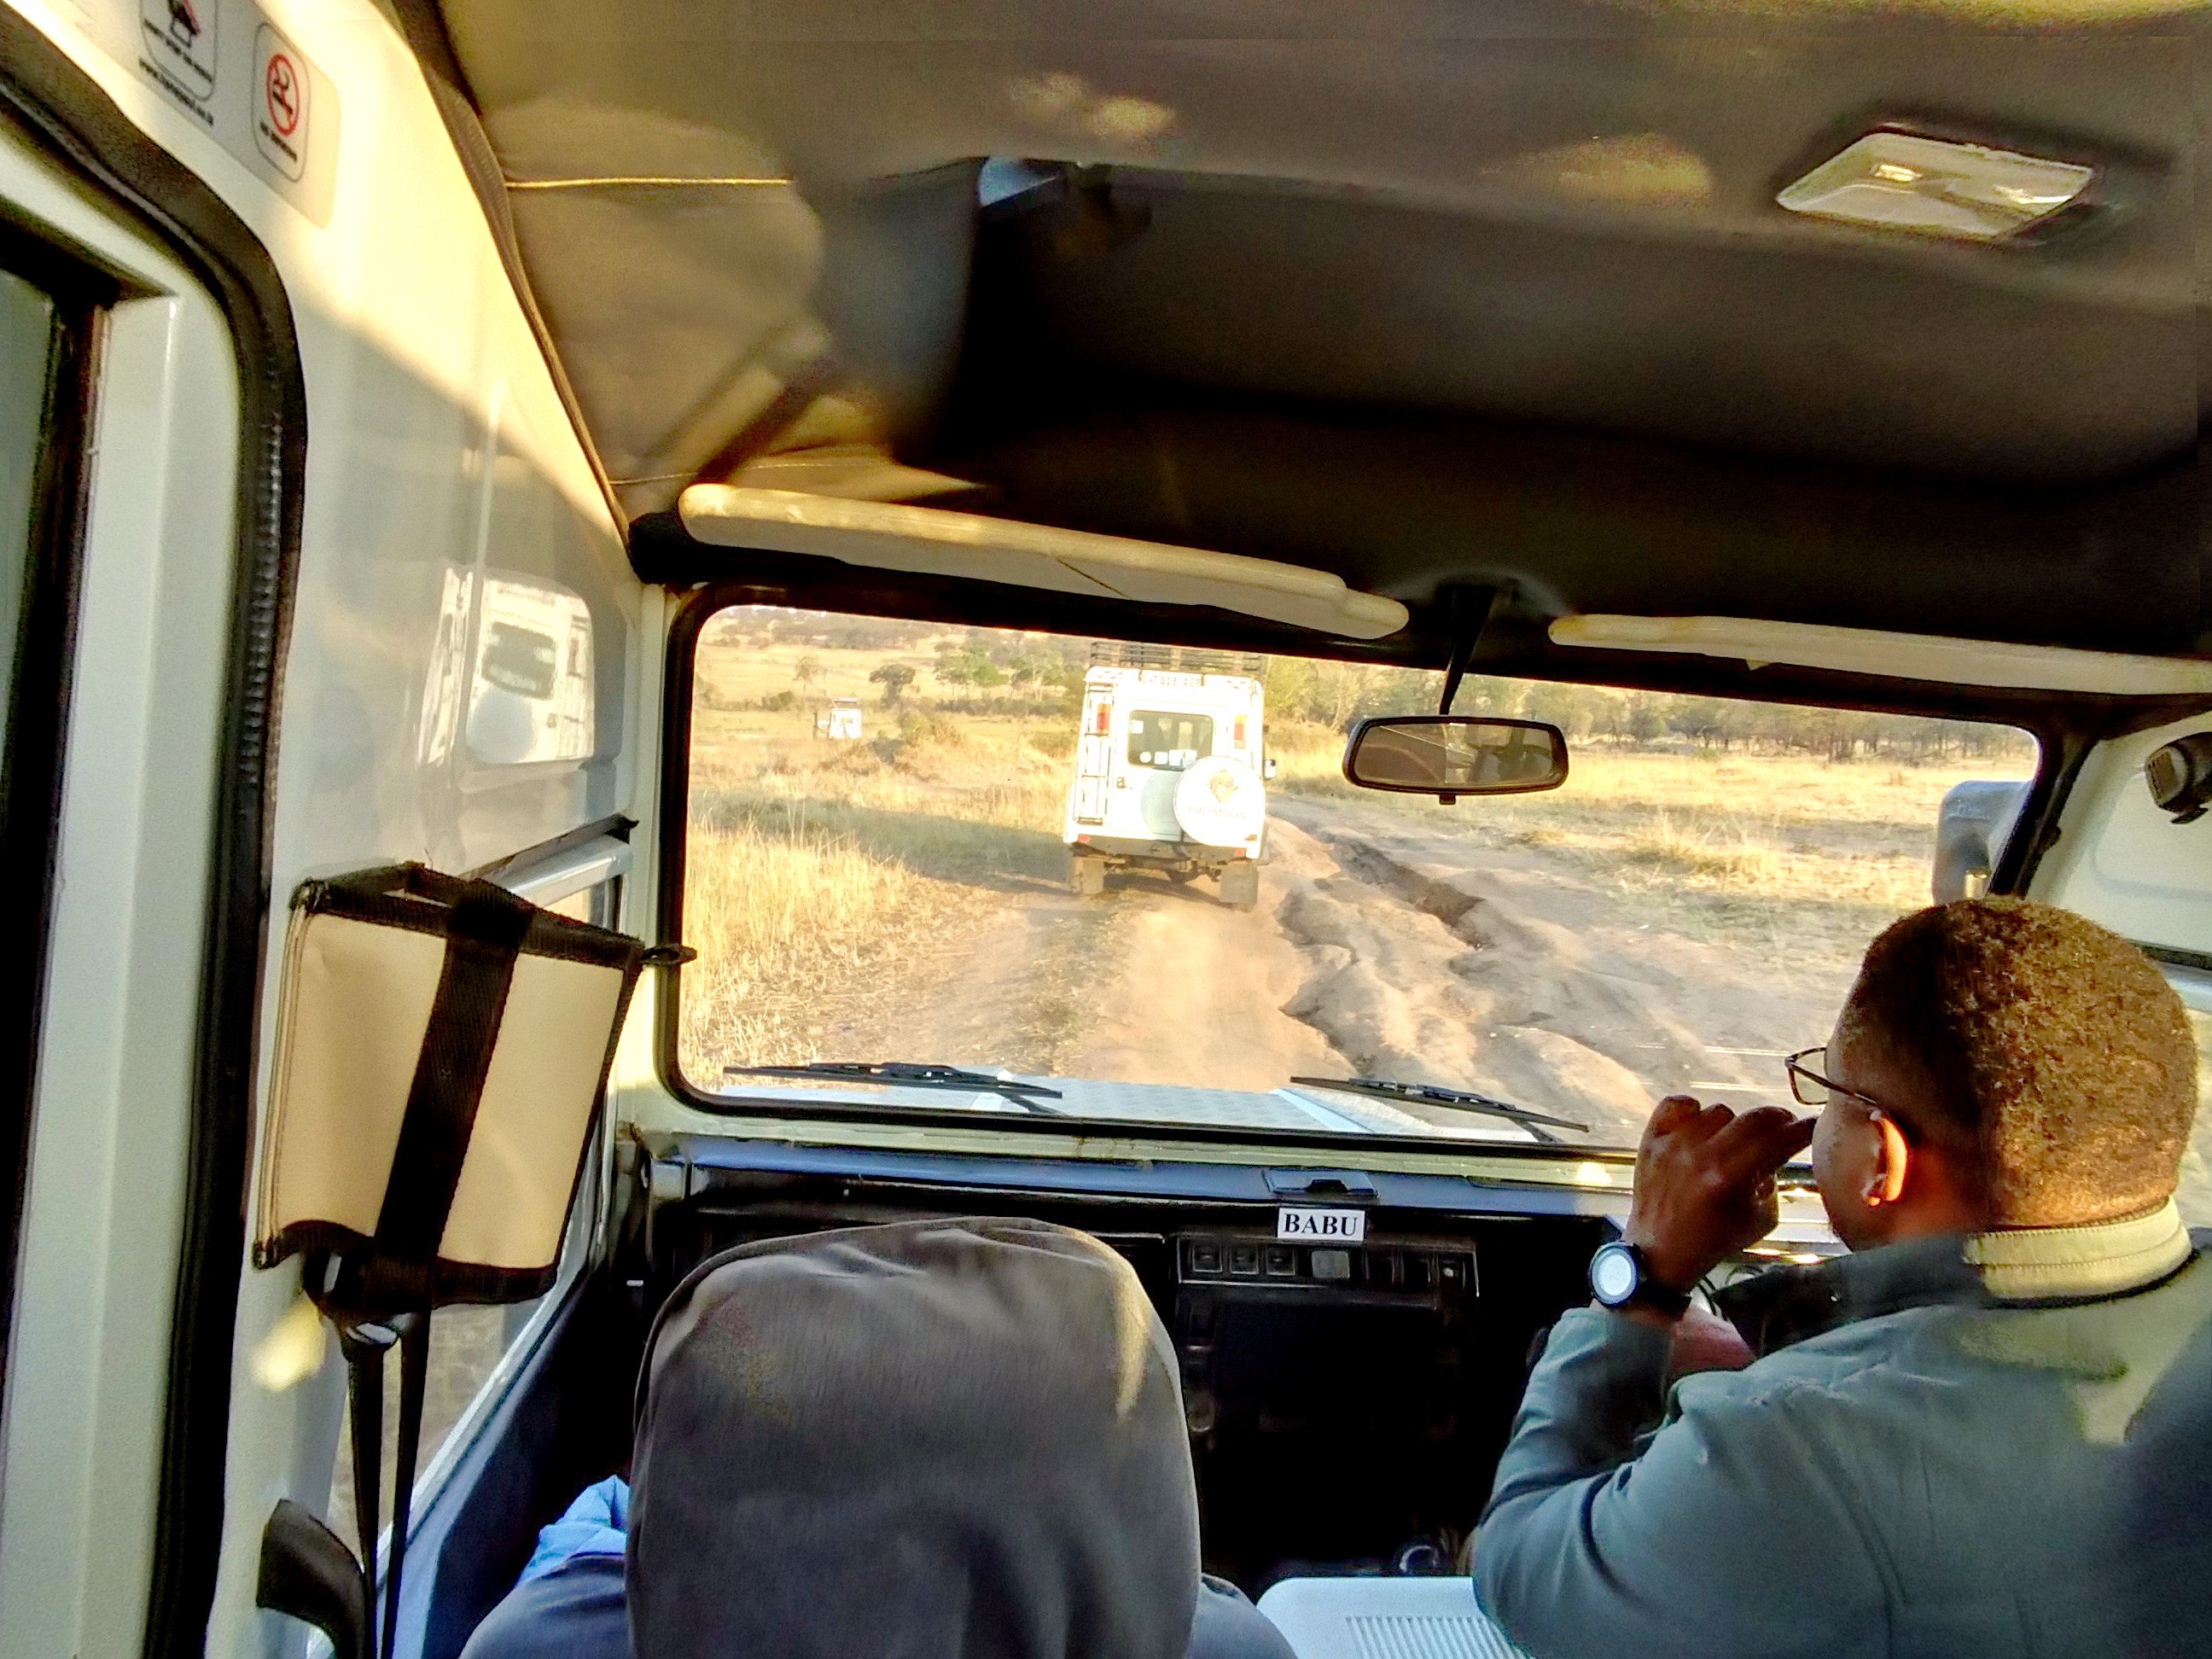 Rough roads in Tanzania, from inside the car